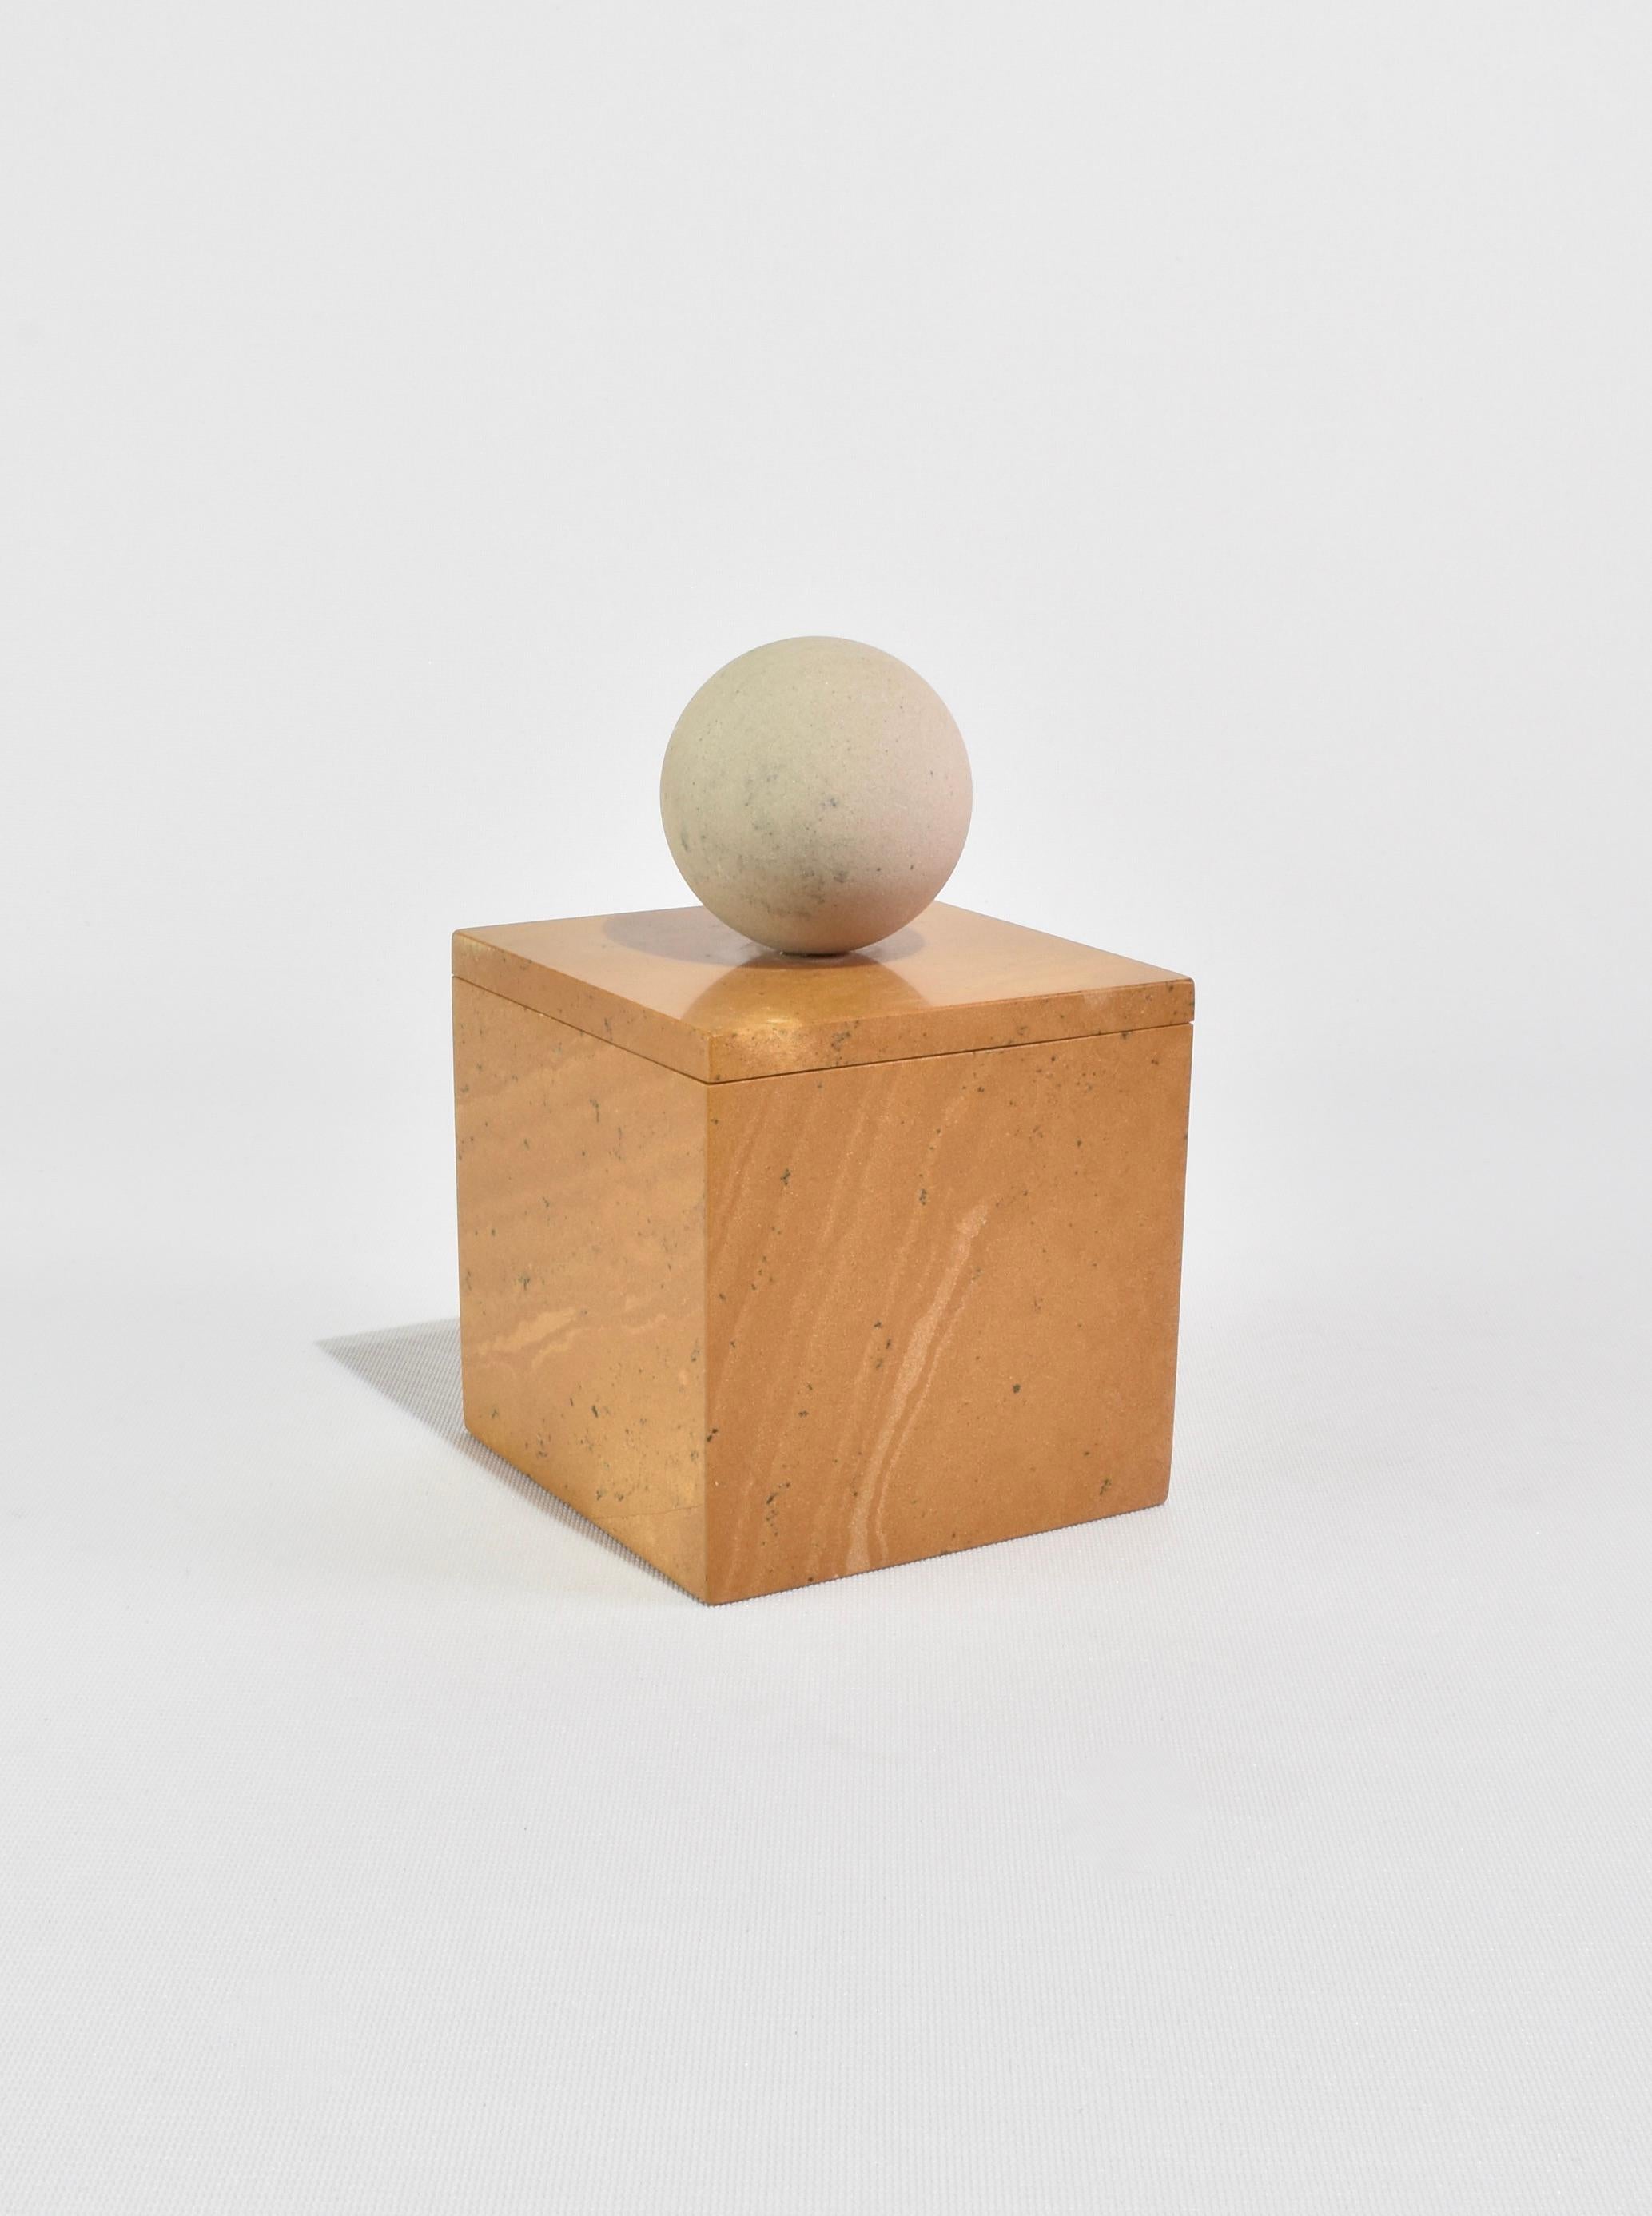 The Curio Box by Casa Shop in Yellow Jaisalmer with Beige Sandstone. Inspired by a favorite vintage find, each box features a square base with a sphere handle. Handmade by artisans in India.

Use it to hide away an array of items – a rare collection